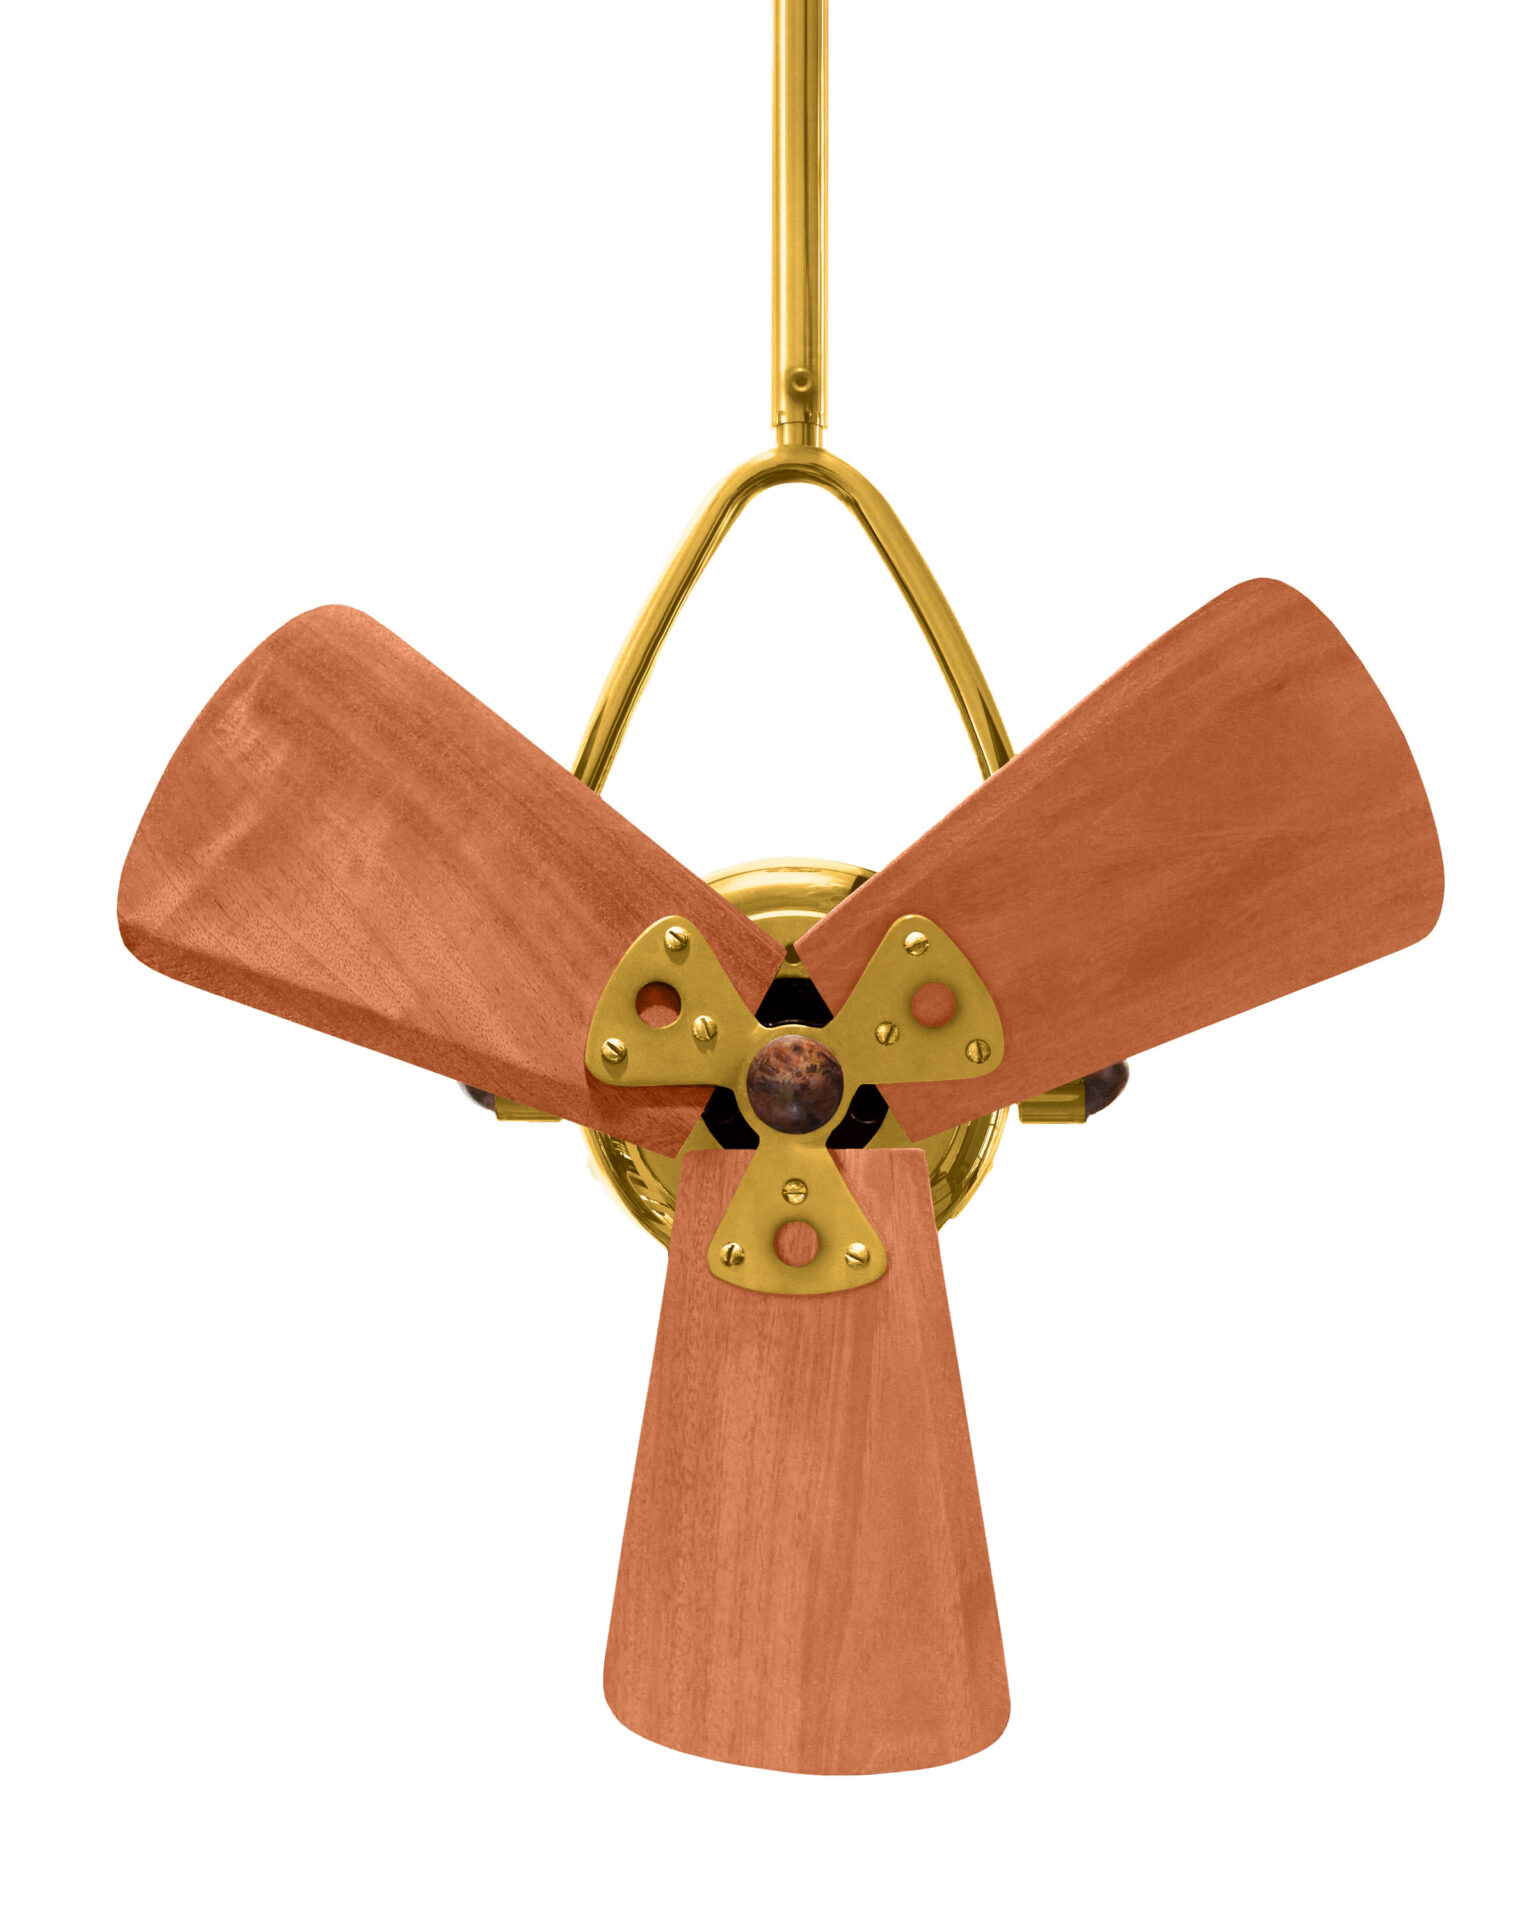 Jarold Direcional ceiling fan in gold / ouro finish with solid mahogany wood blades made by Matthews Fan Company.